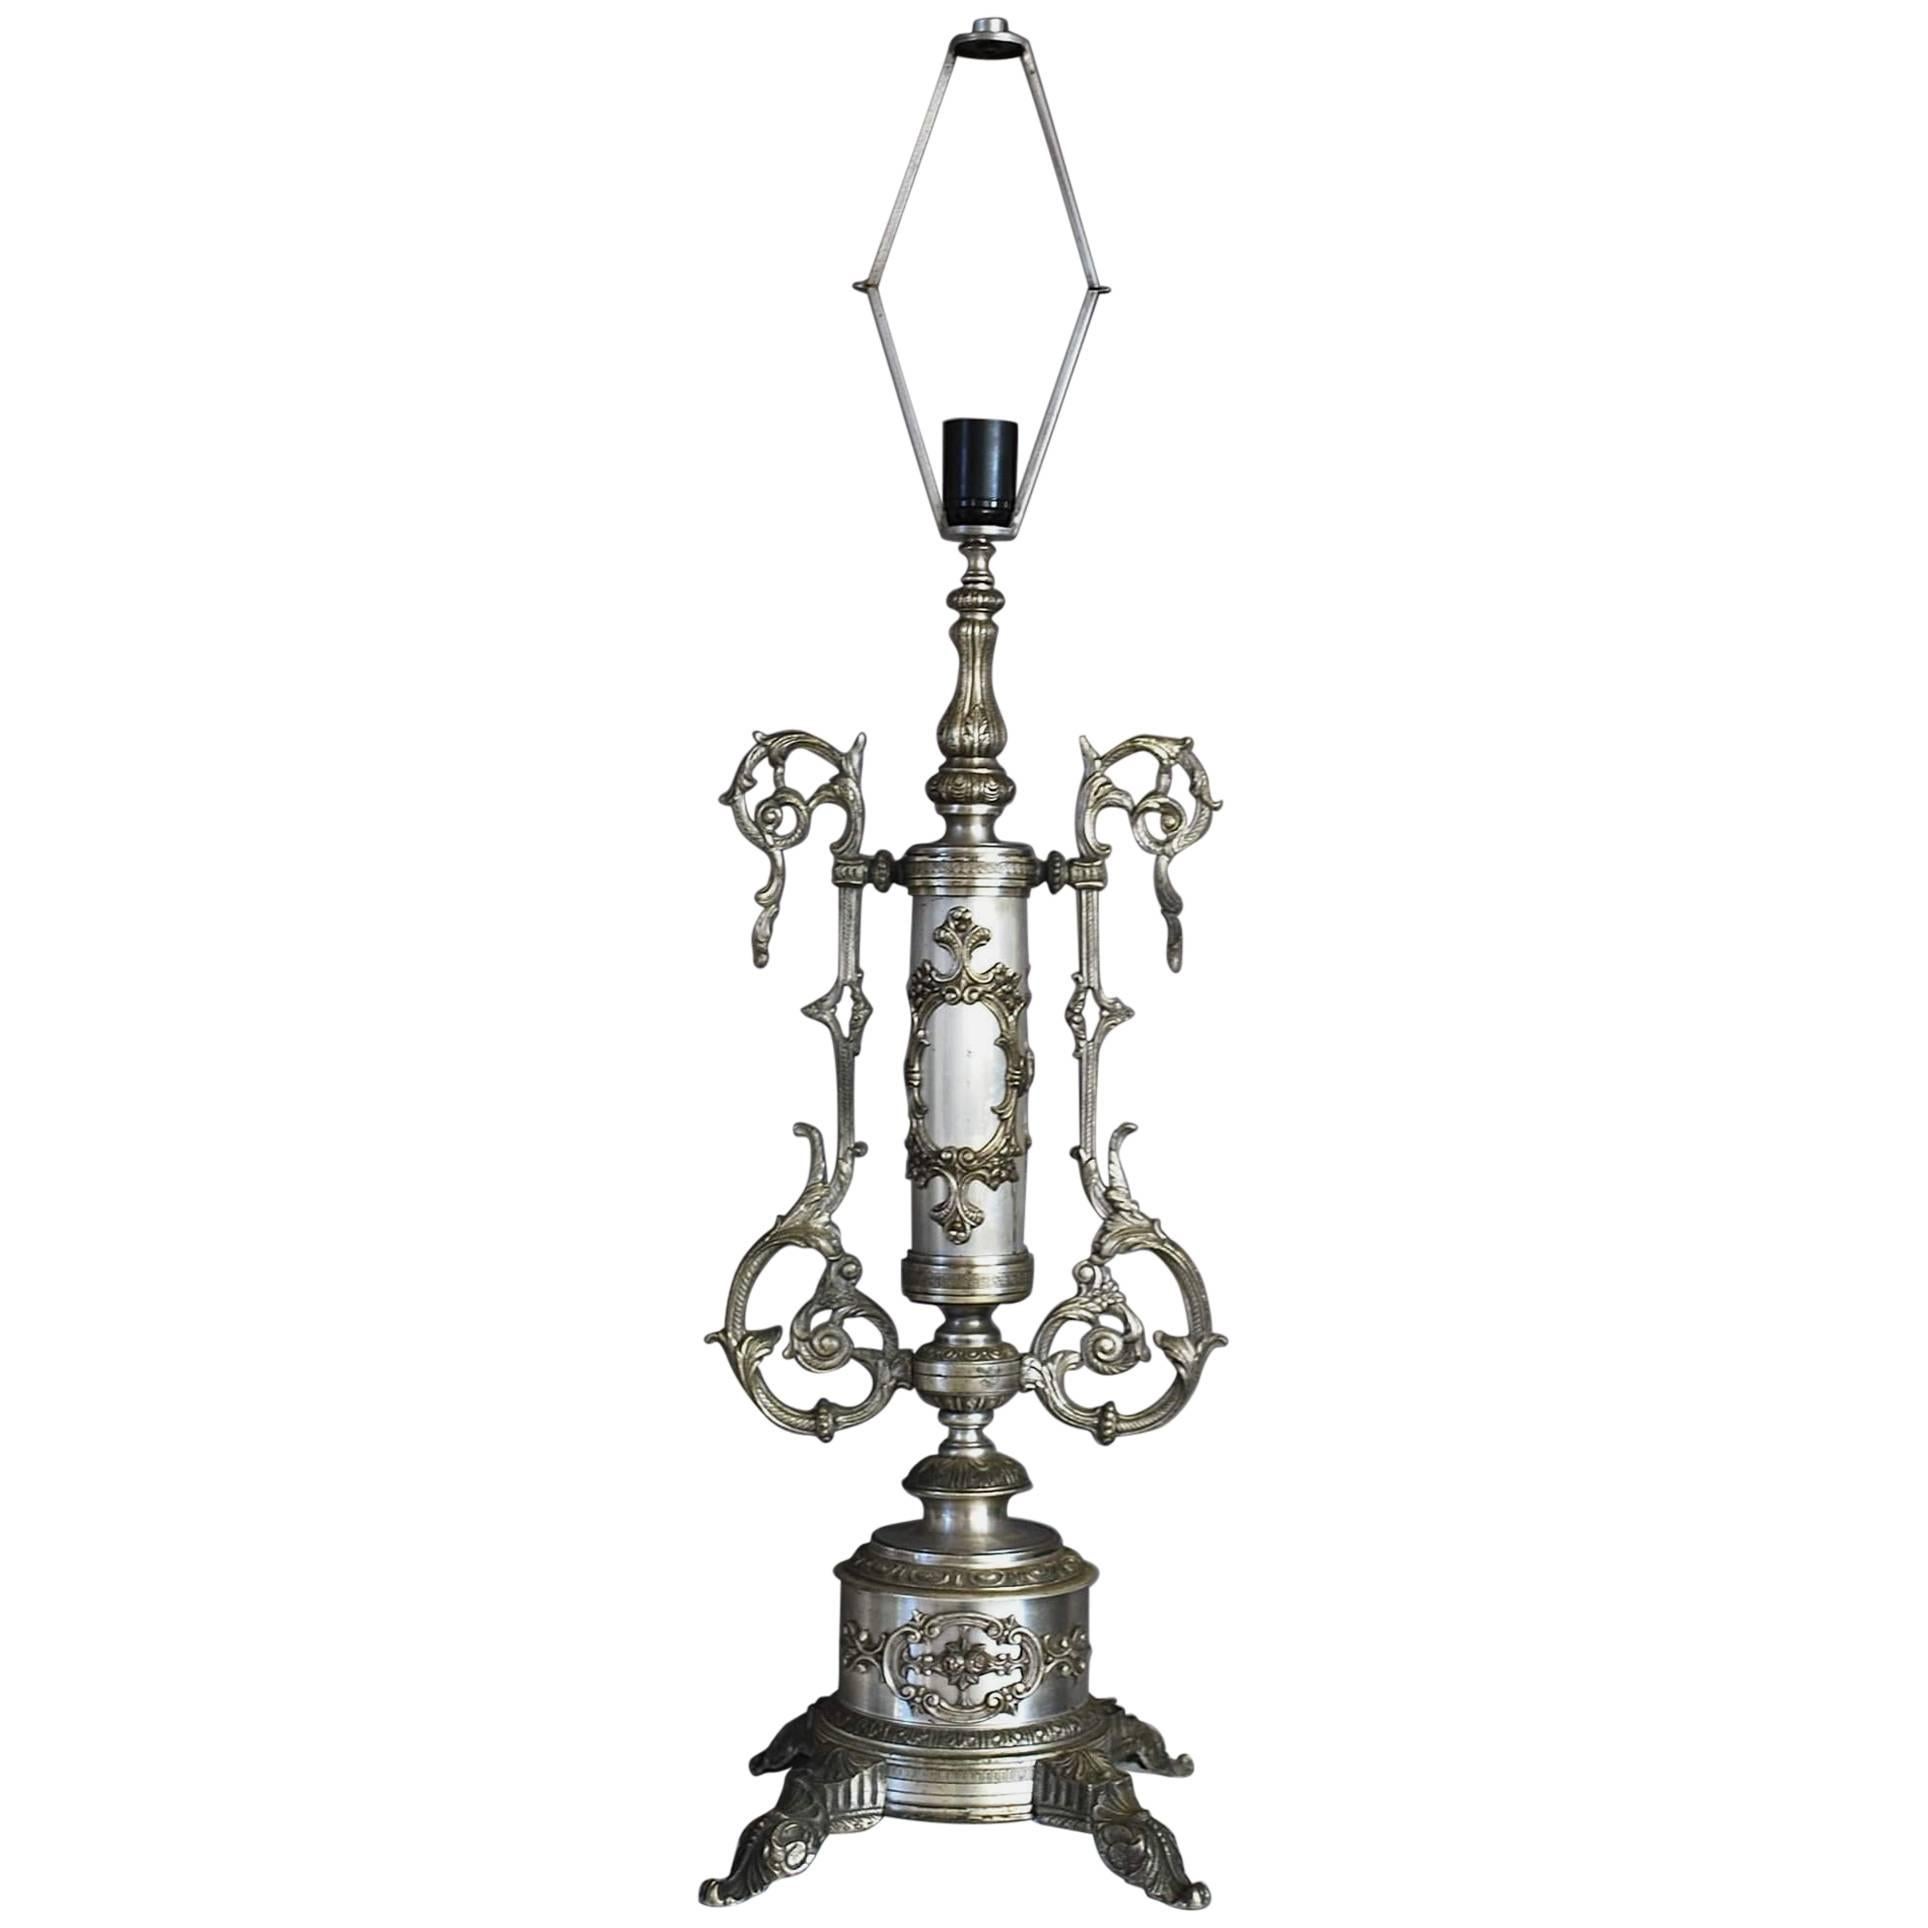 Large 19th Century French Empire Style Lamp For Sale